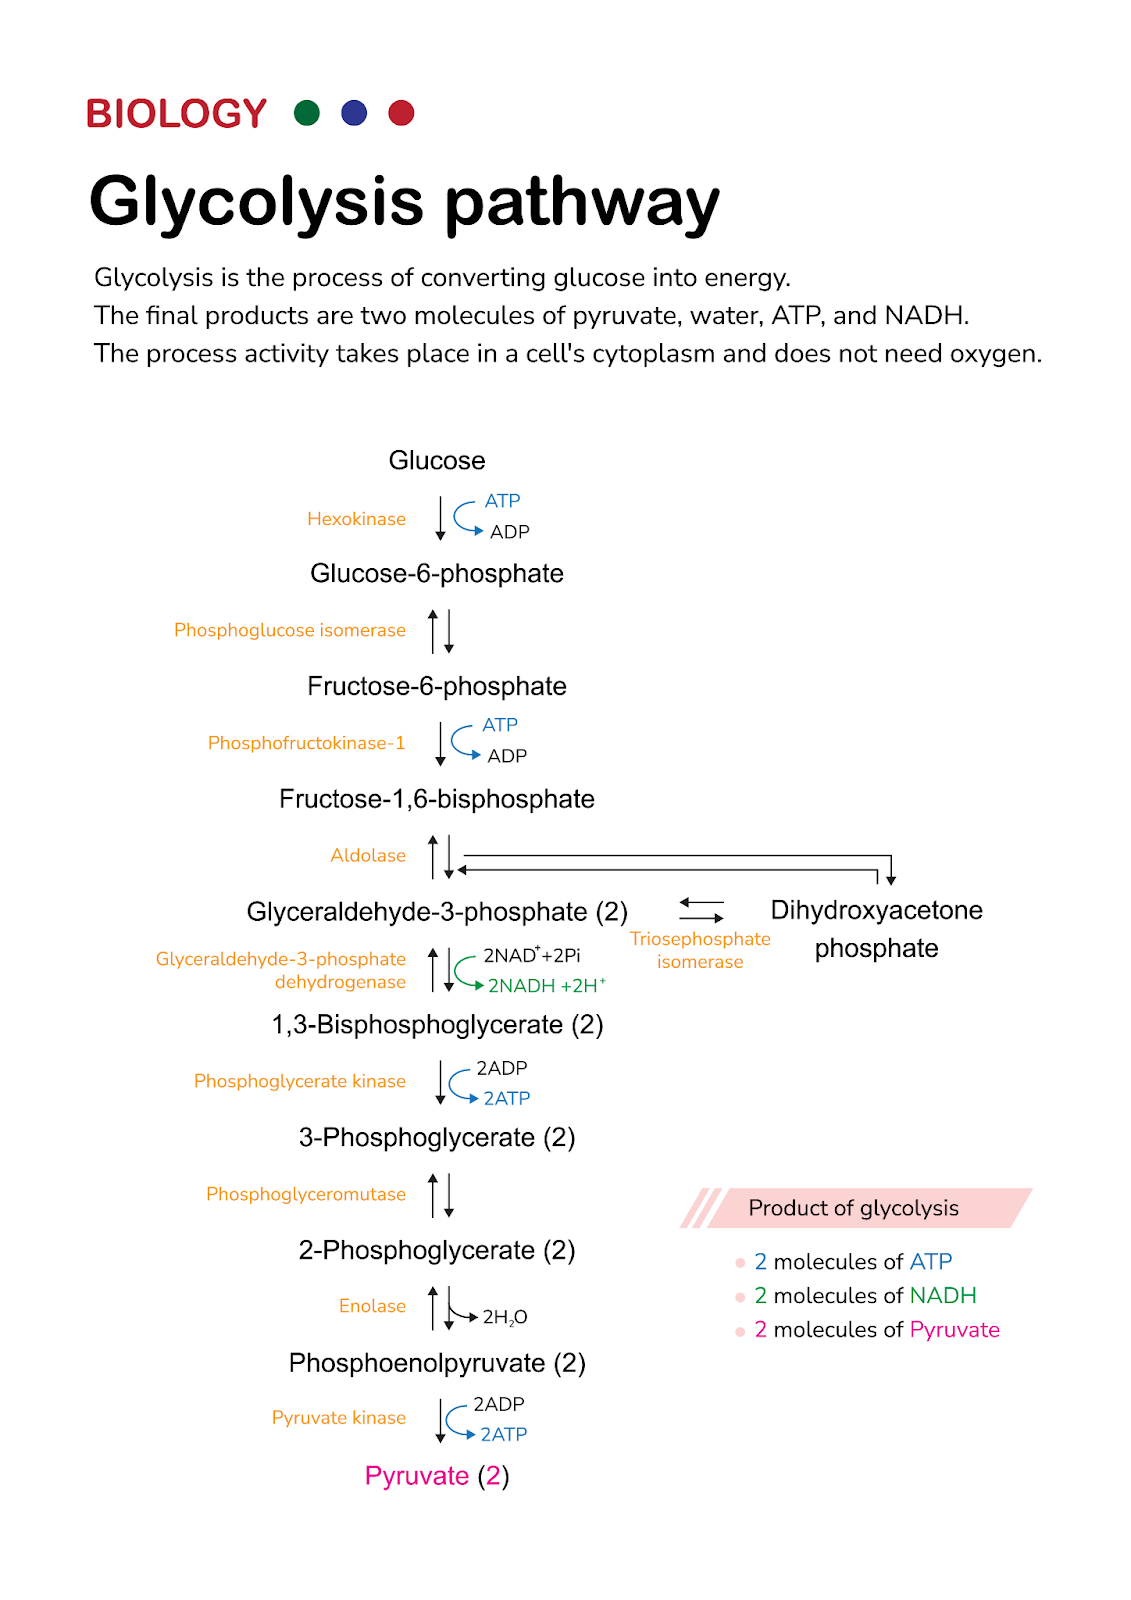 A diagram showing the steps involved in glycolysis.